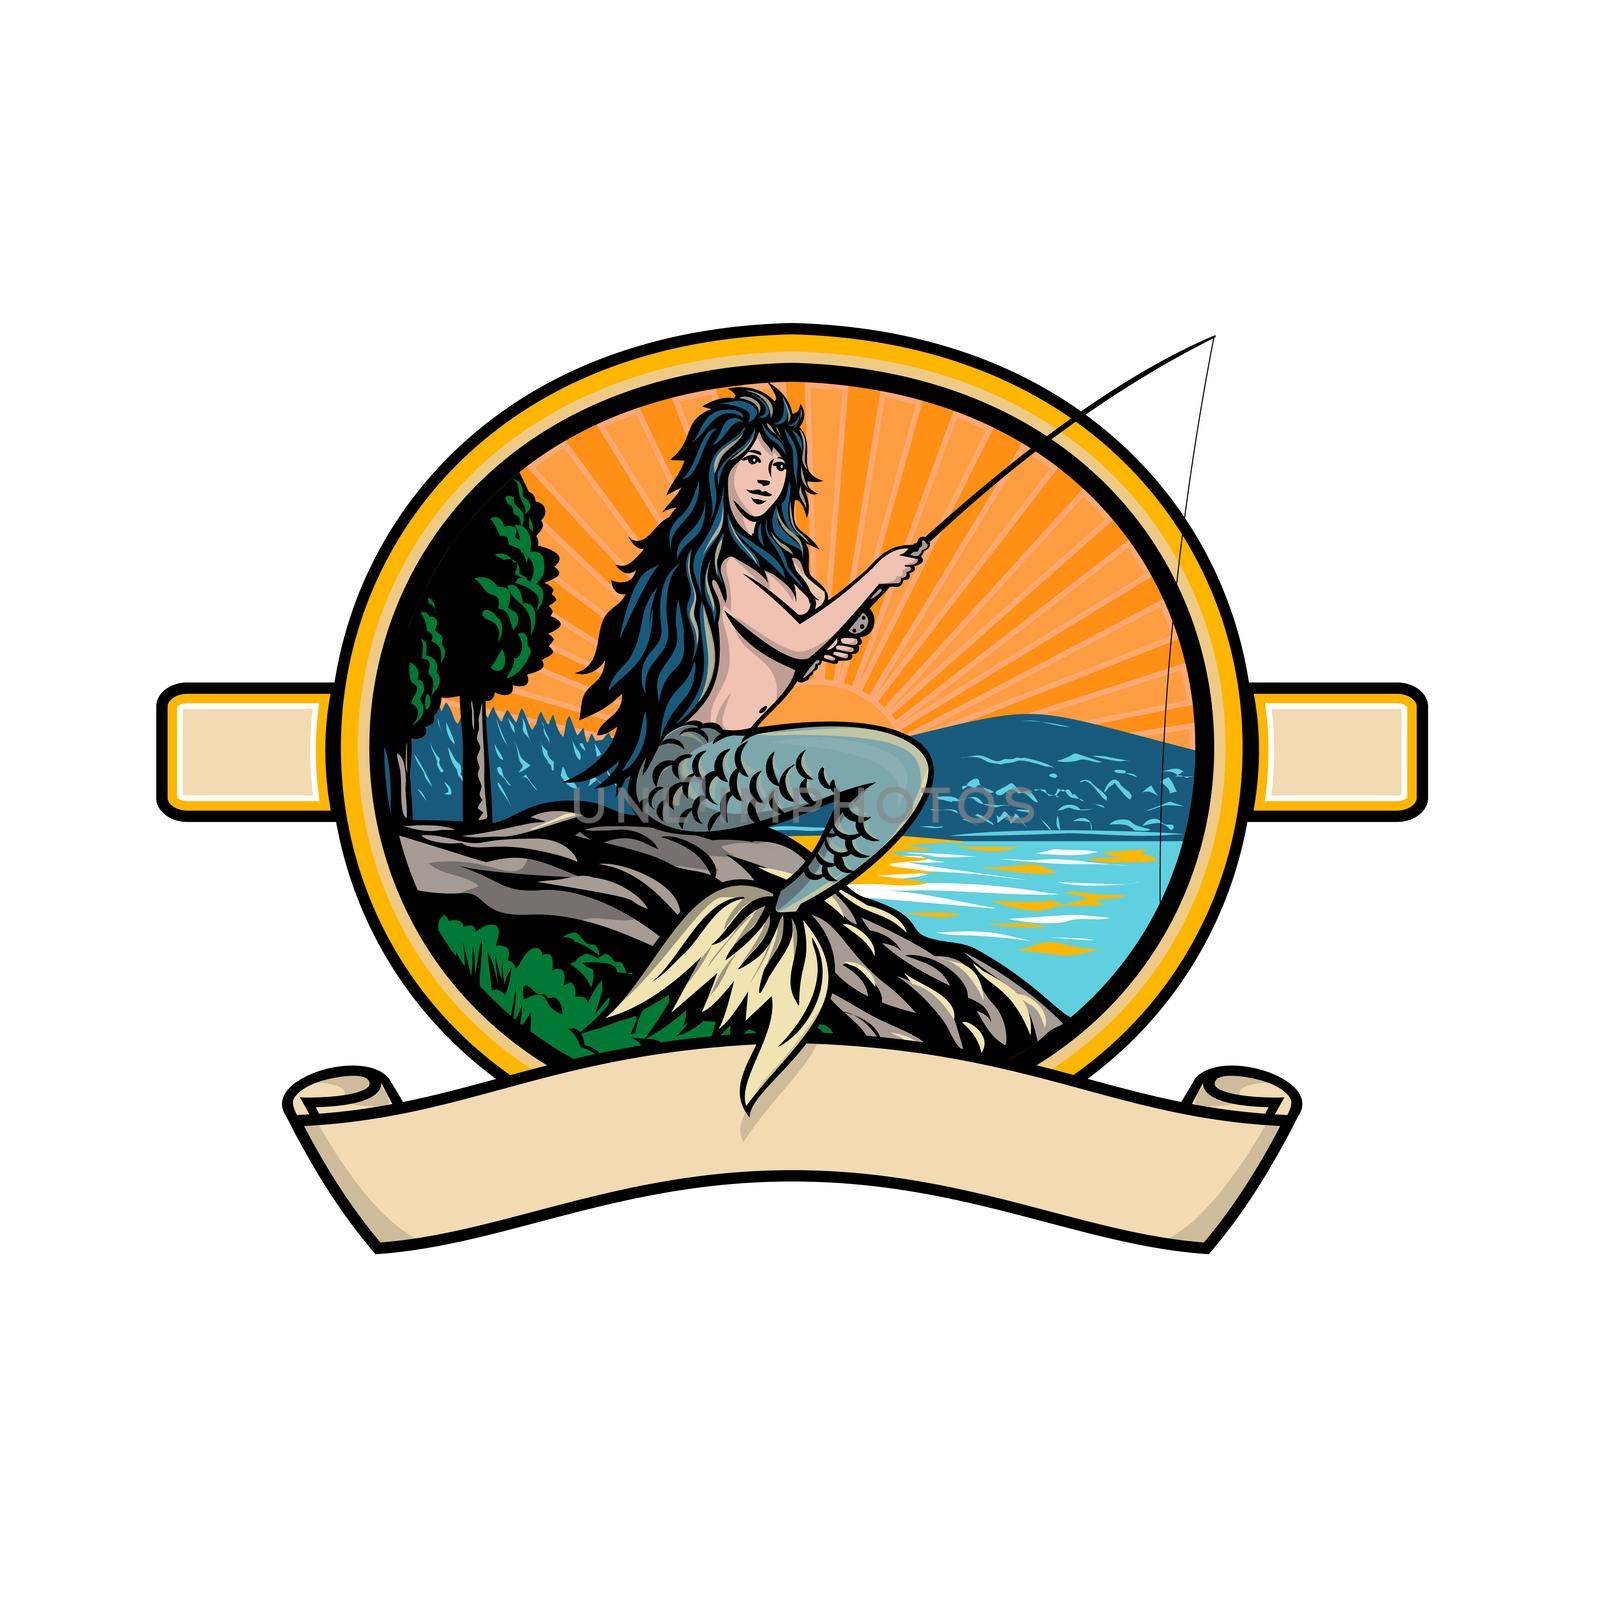 Retro style illustration of mermaid with fishing rod and reel fly fishing in lake or river with mountains and sunburst viewed from side set inside oval on isolated background in full color style.